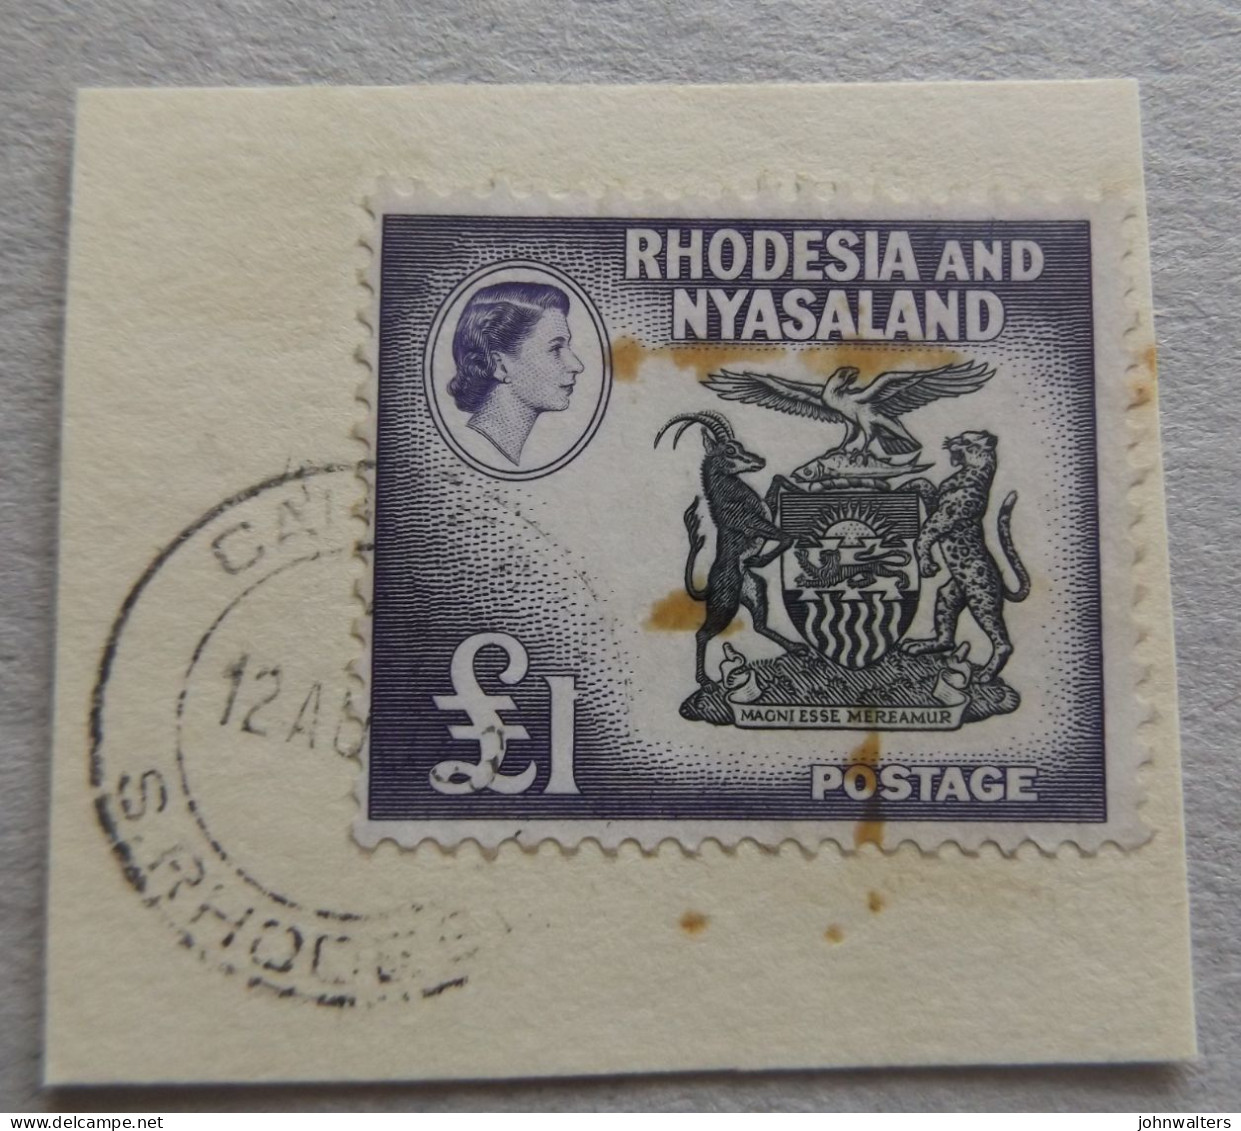 1959 Rhodesia & Nyasaland £1 Definitive Used On Piece Postmarked 12 Aug ( Day If Issue ) Stains - Rhodésie & Nyasaland (1954-1963)